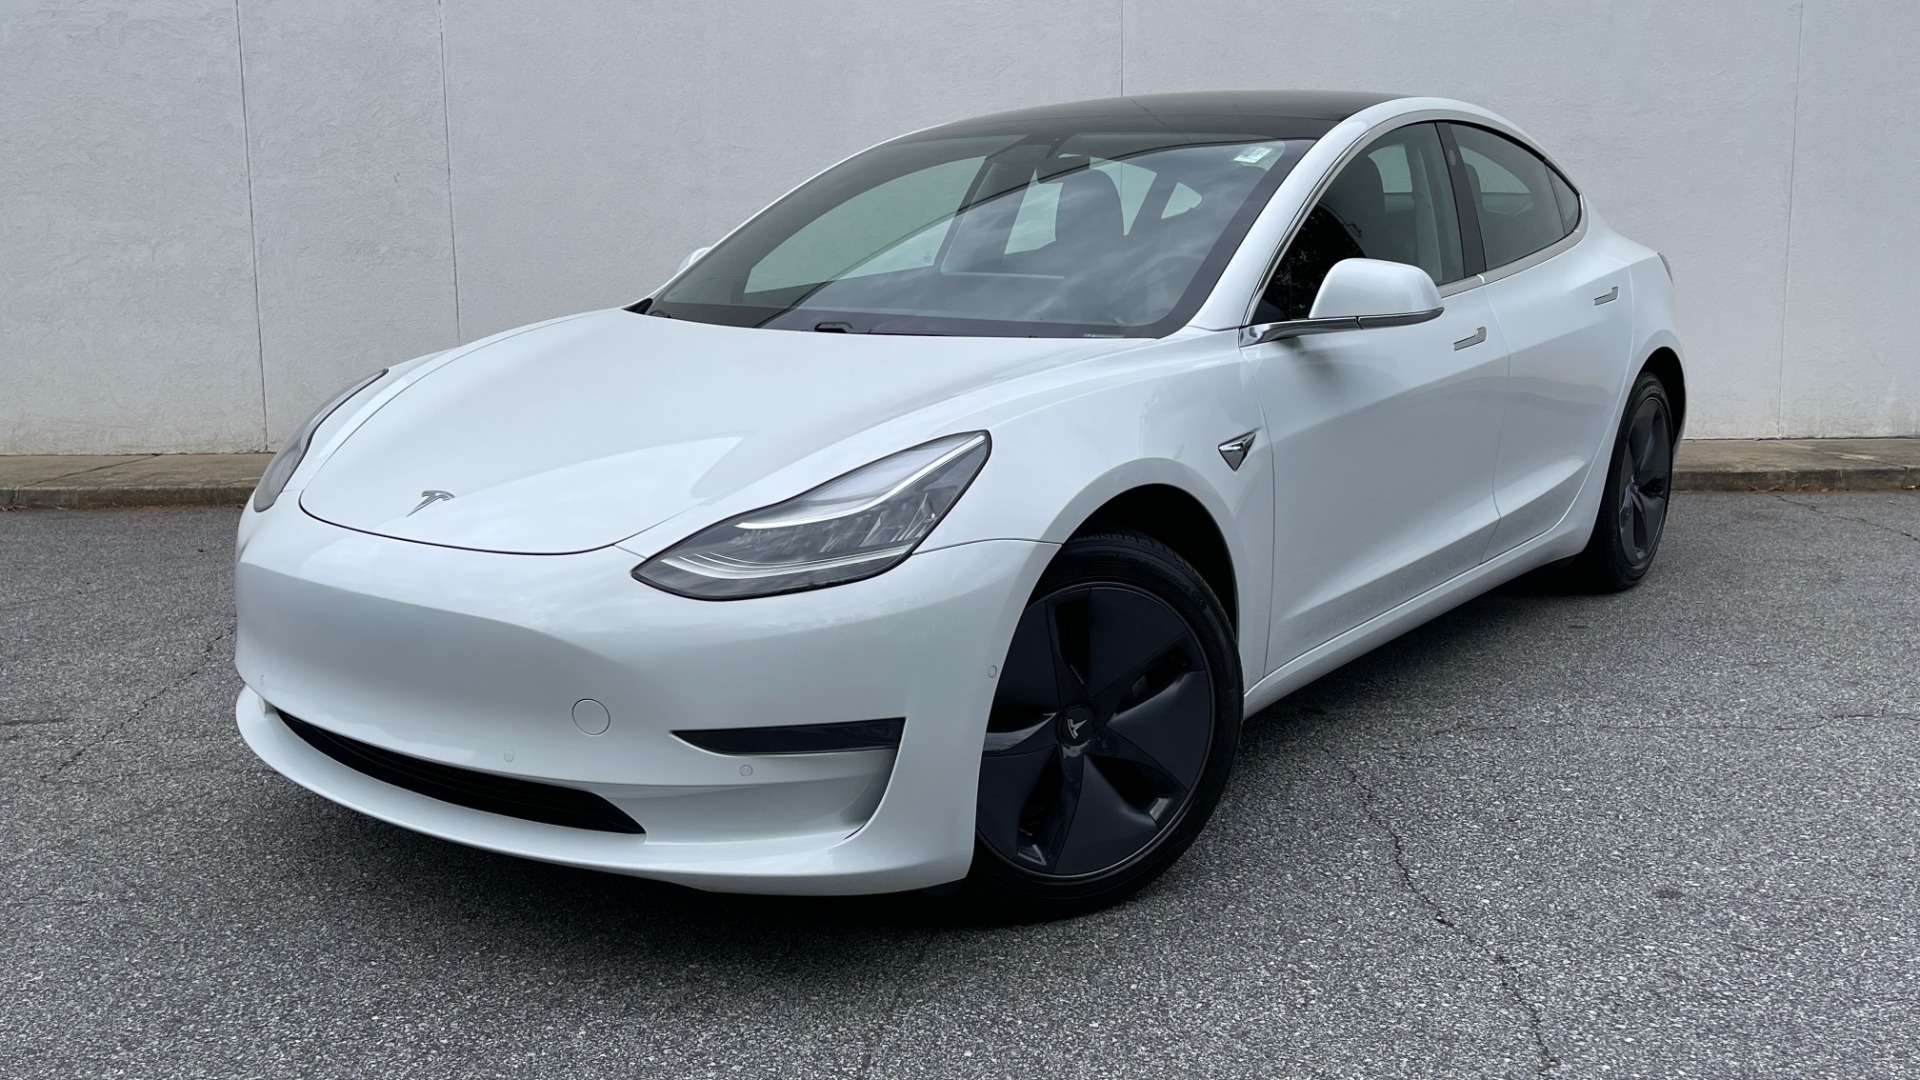 Used 2020 Tesla Model 3 STANDARD RANGE PLUS / AUTOPILOT / STANDARD CONNECTIVITY / PEARL WHITE for sale $46,995 at Formula Imports in Charlotte NC 28227 1